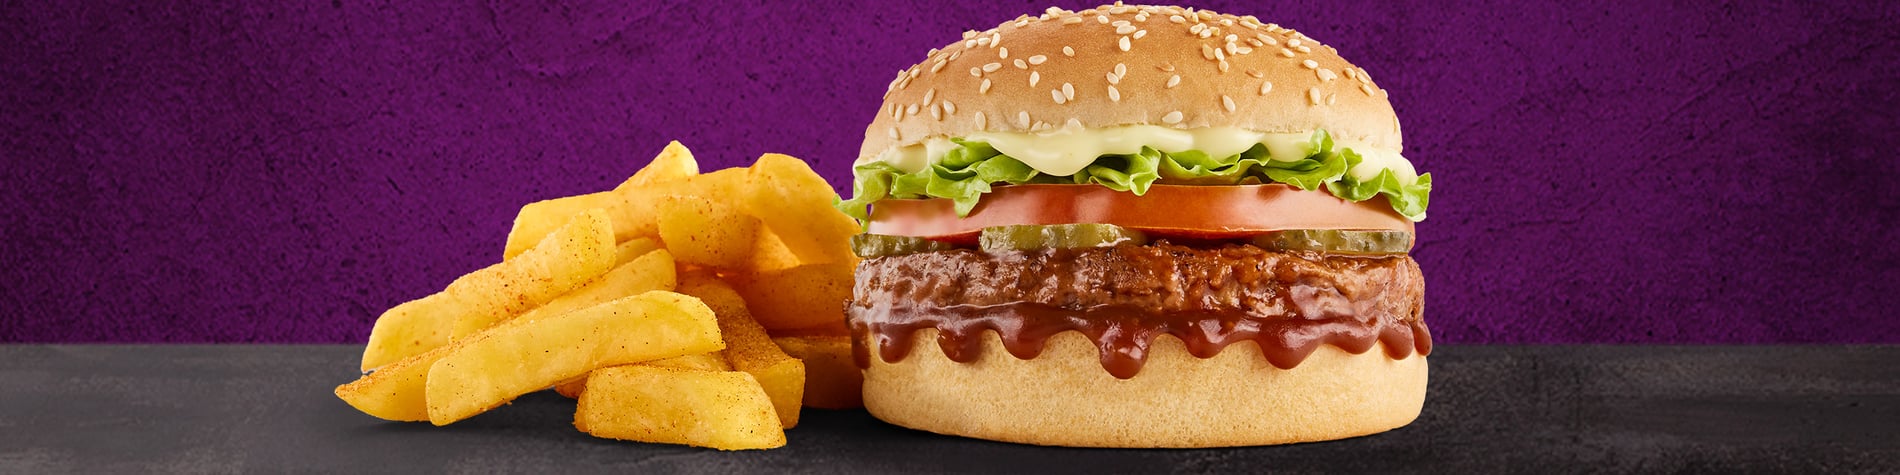 New Phanda Burger with chips on a grey surface against a purple background.